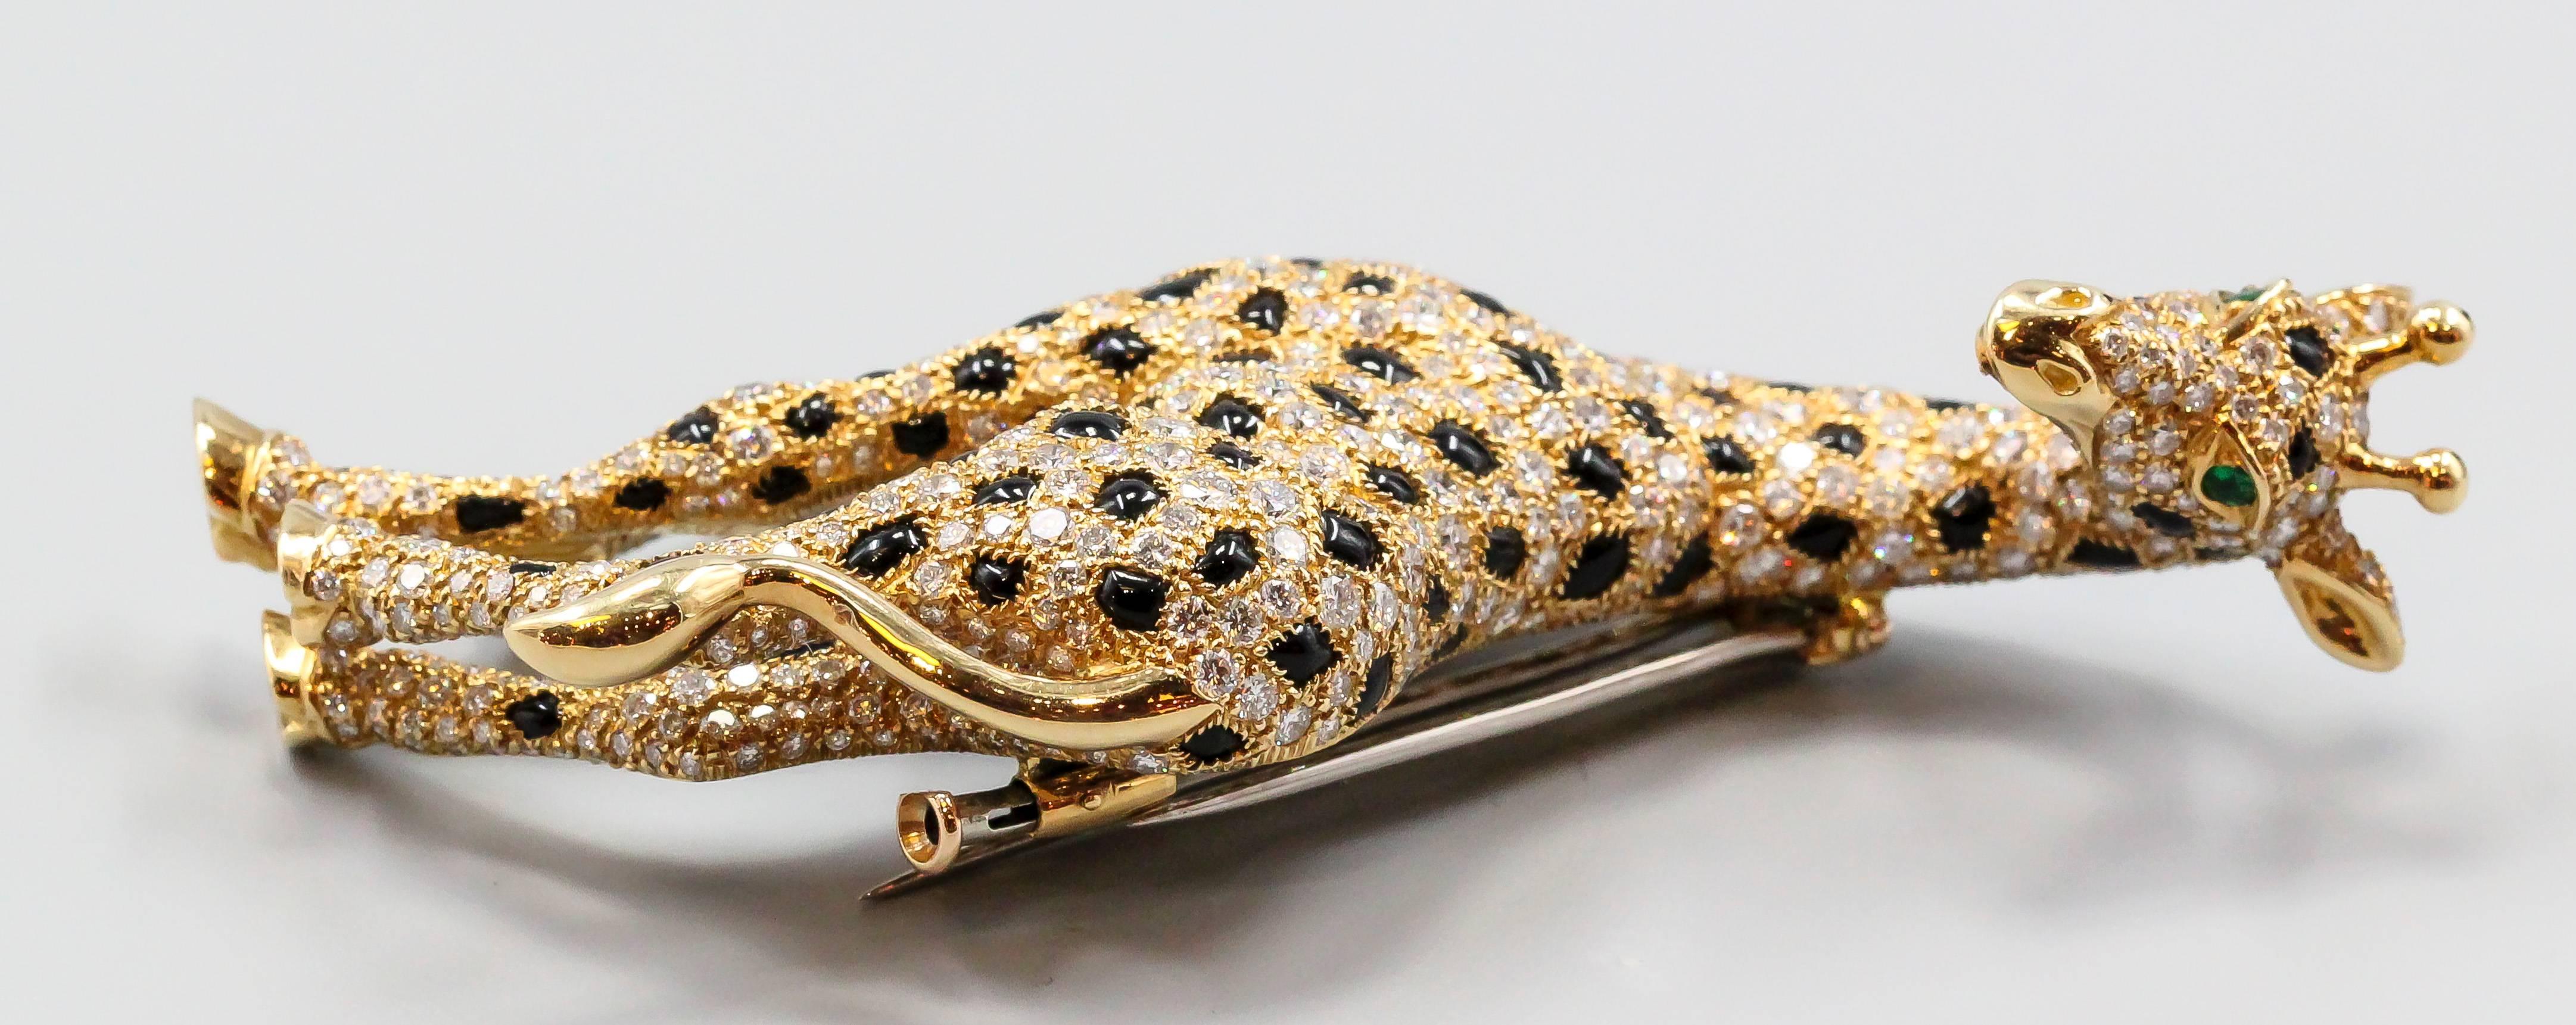 Rare and unusual diamond, emerald, onyx and 18K yellow gold brooch by Cartier. It resembles a giraffe, with high grade round brilliant cut diamonds throughout the body, black onyx spots, emerald eyes and 18K gold setting. Absolutely stunning piece,